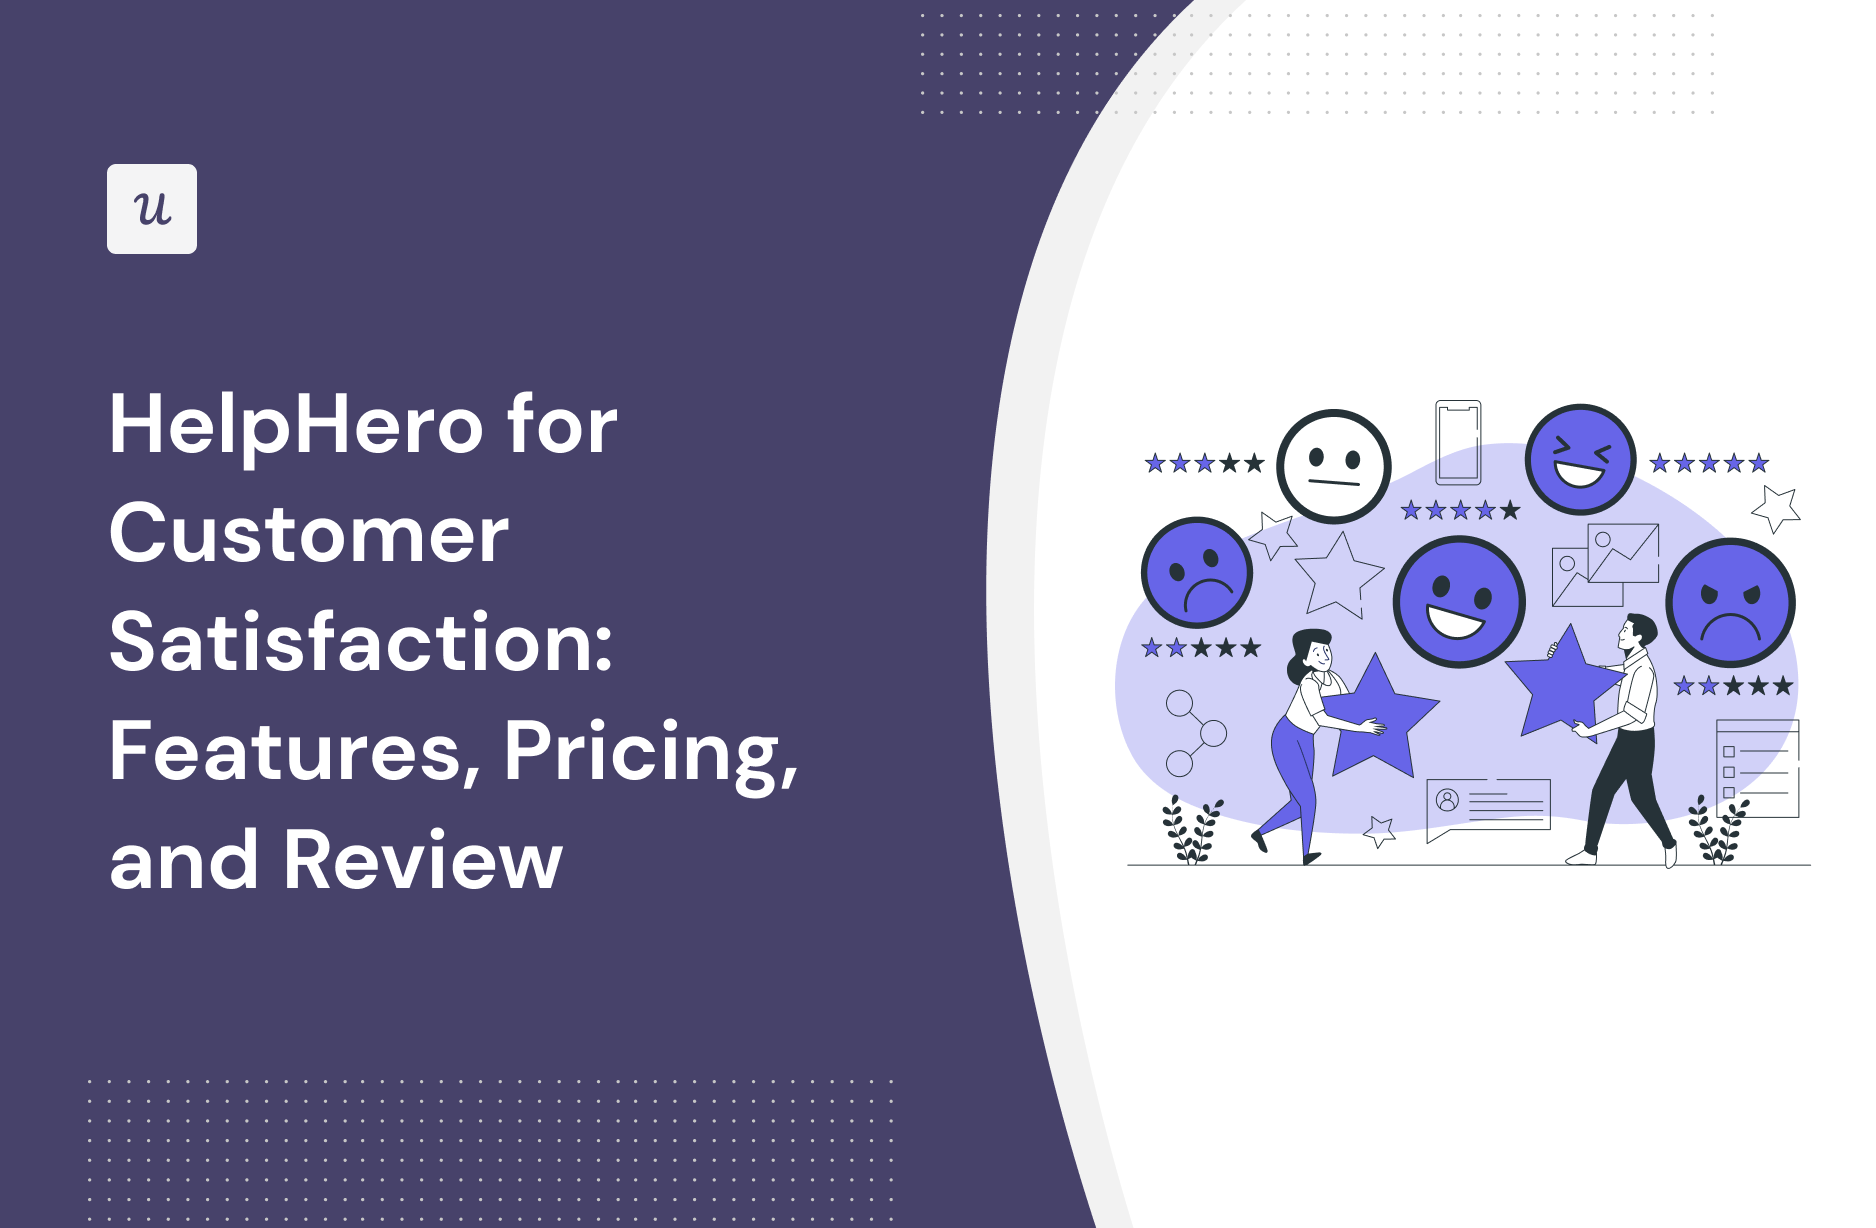 HelpHero for Customer Satisfaction: Features, Pricing, and Review